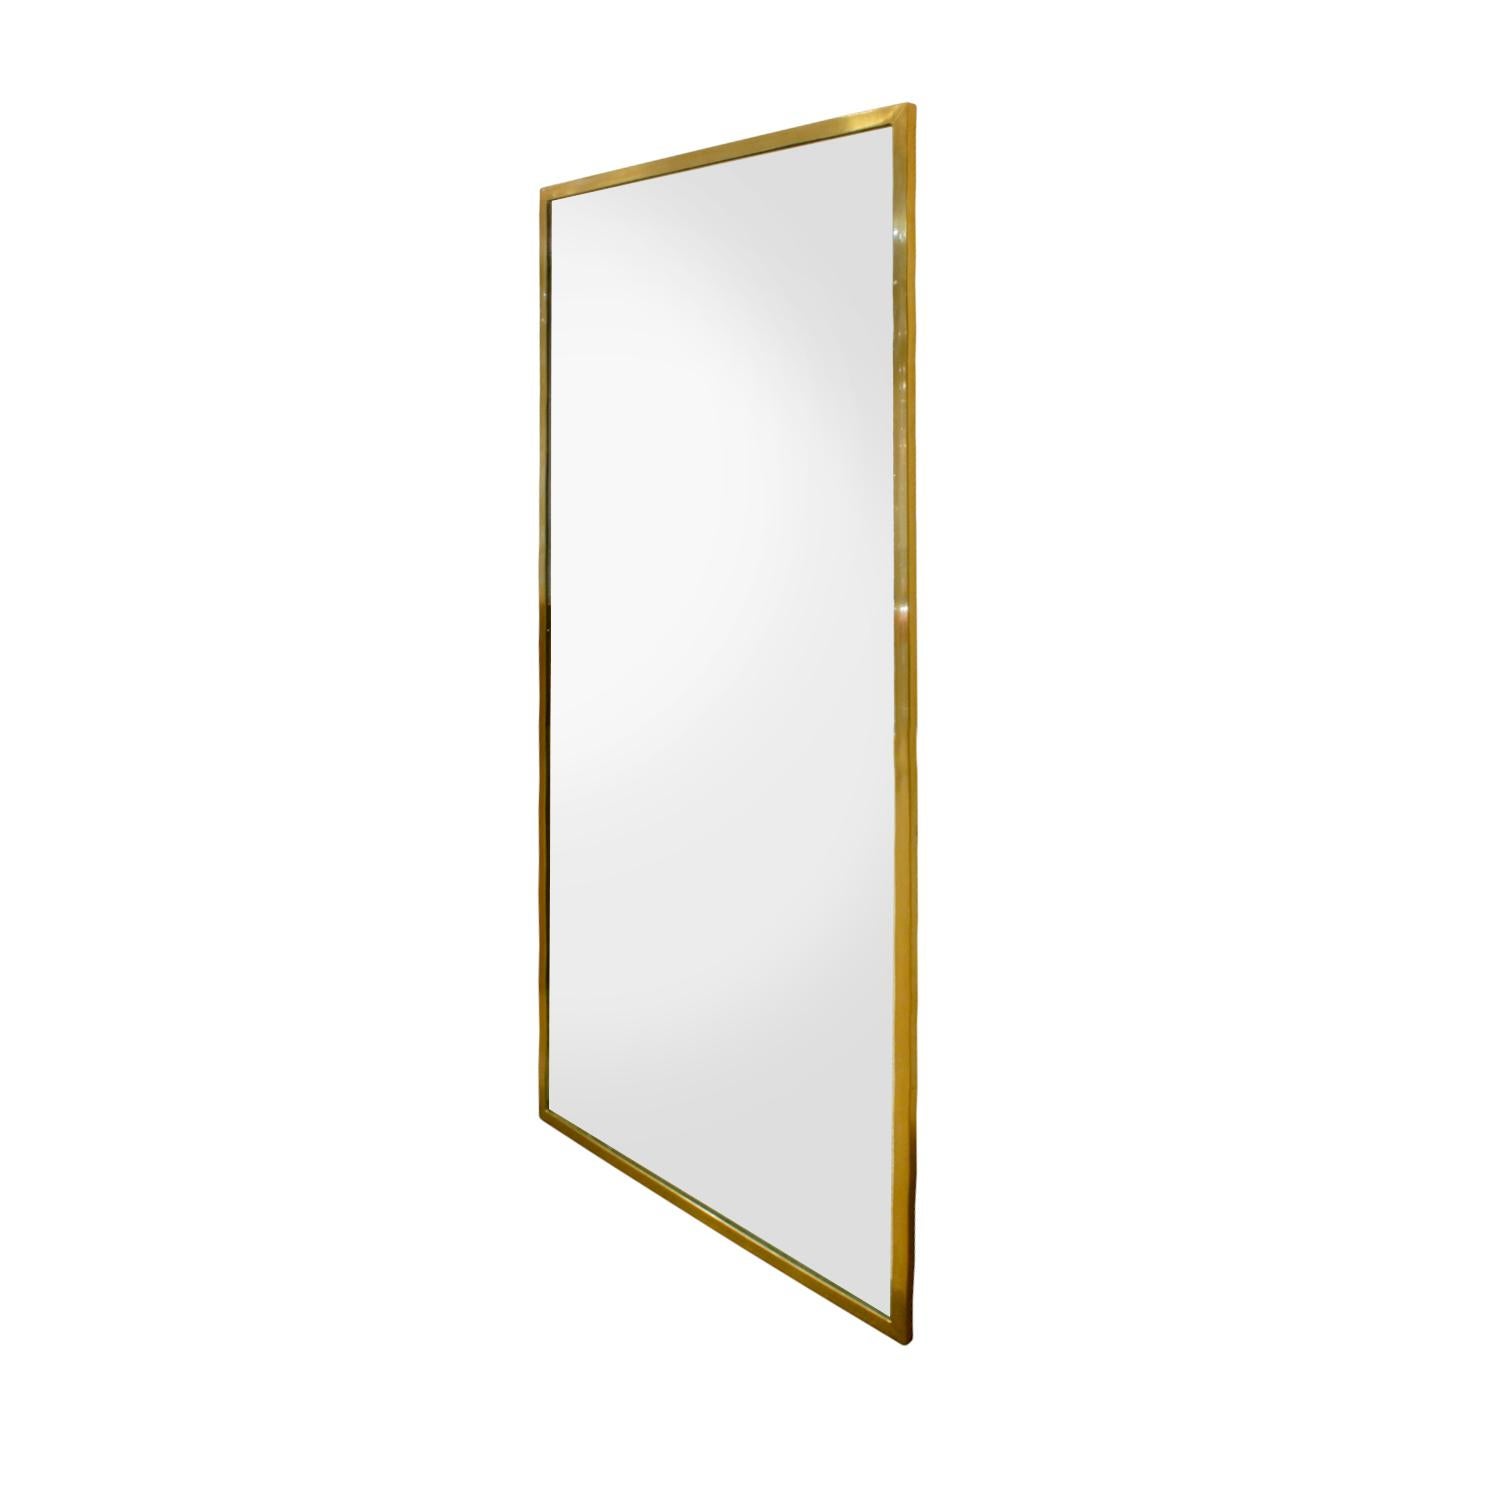 Large rectangular mirror with brass frame by Harvey Probber, American, 1950s.